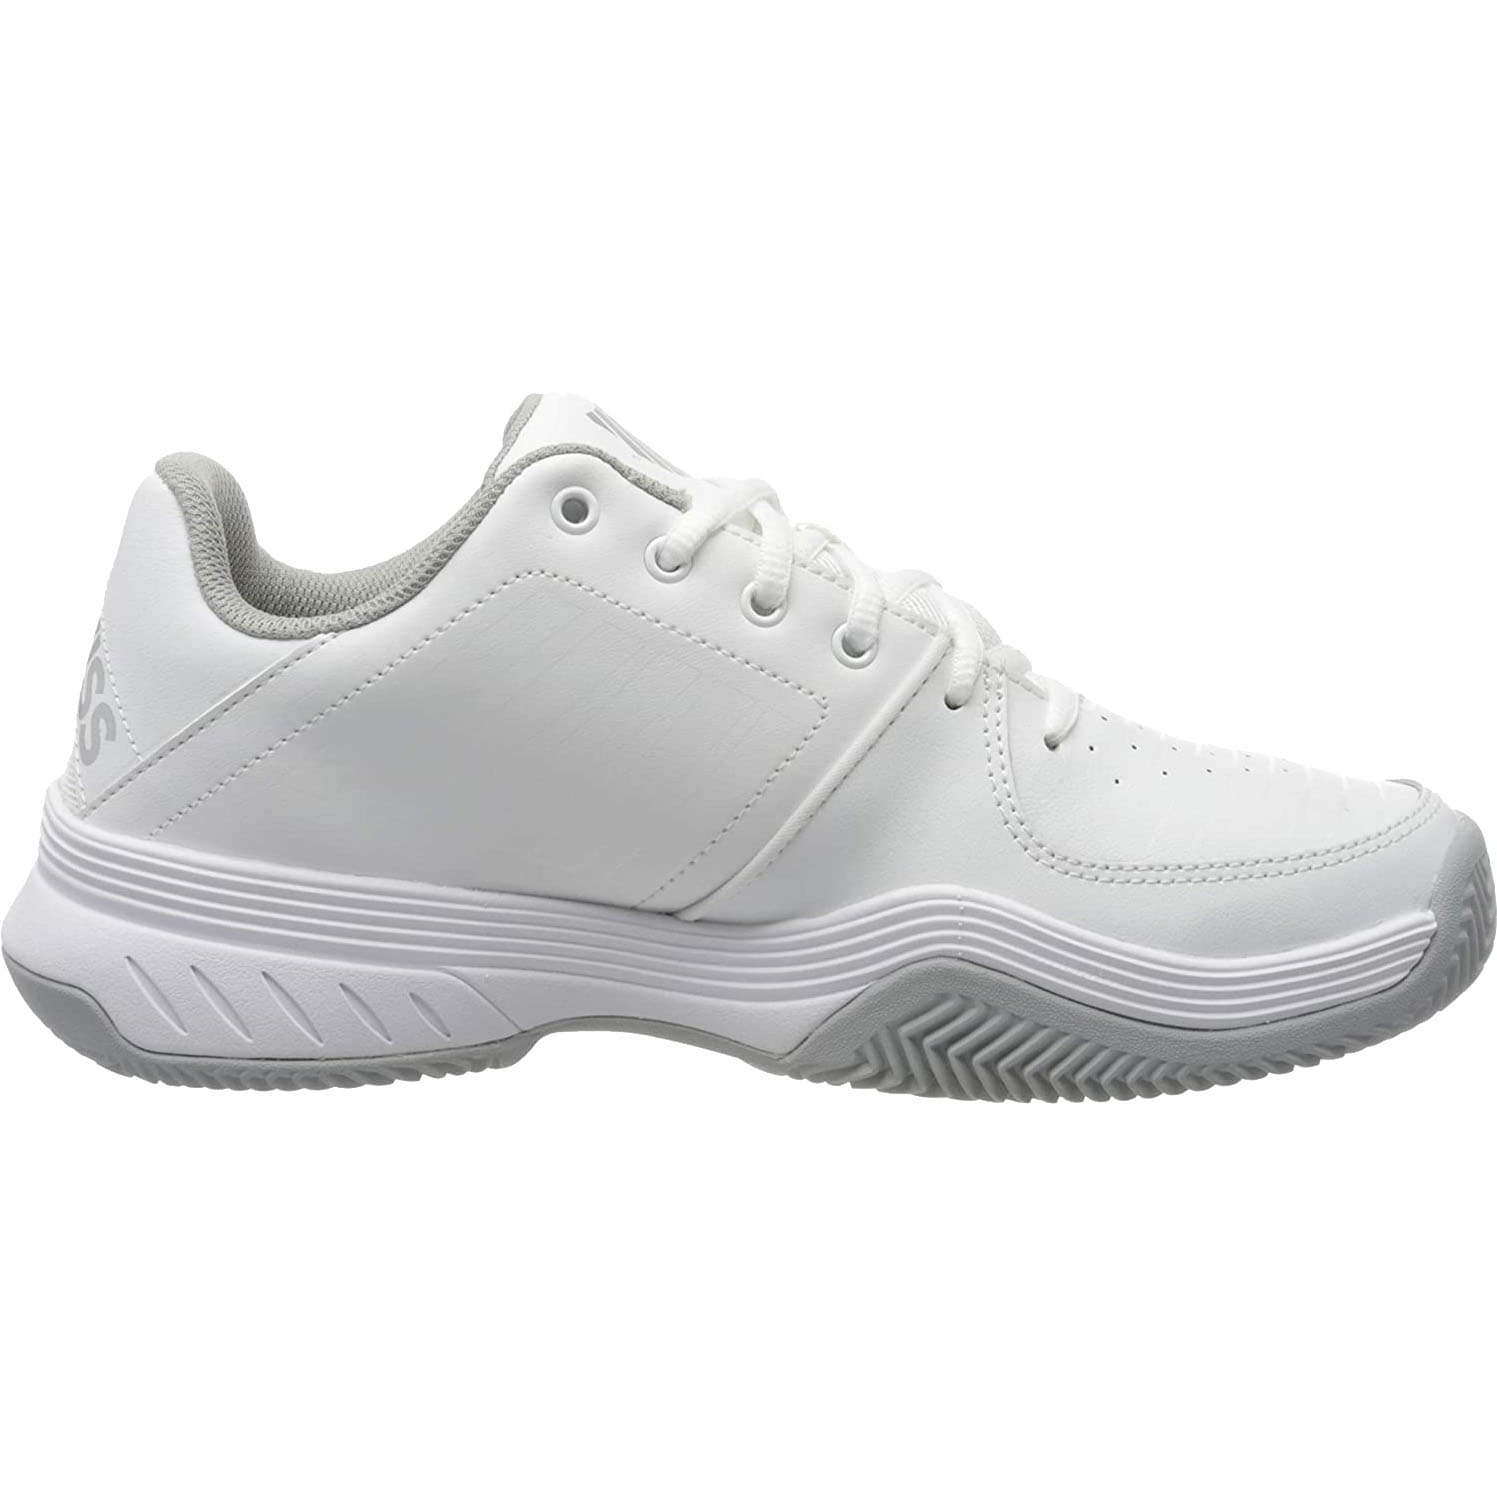 k-swiss womens court express hb tennis shoes trainers - uk 6